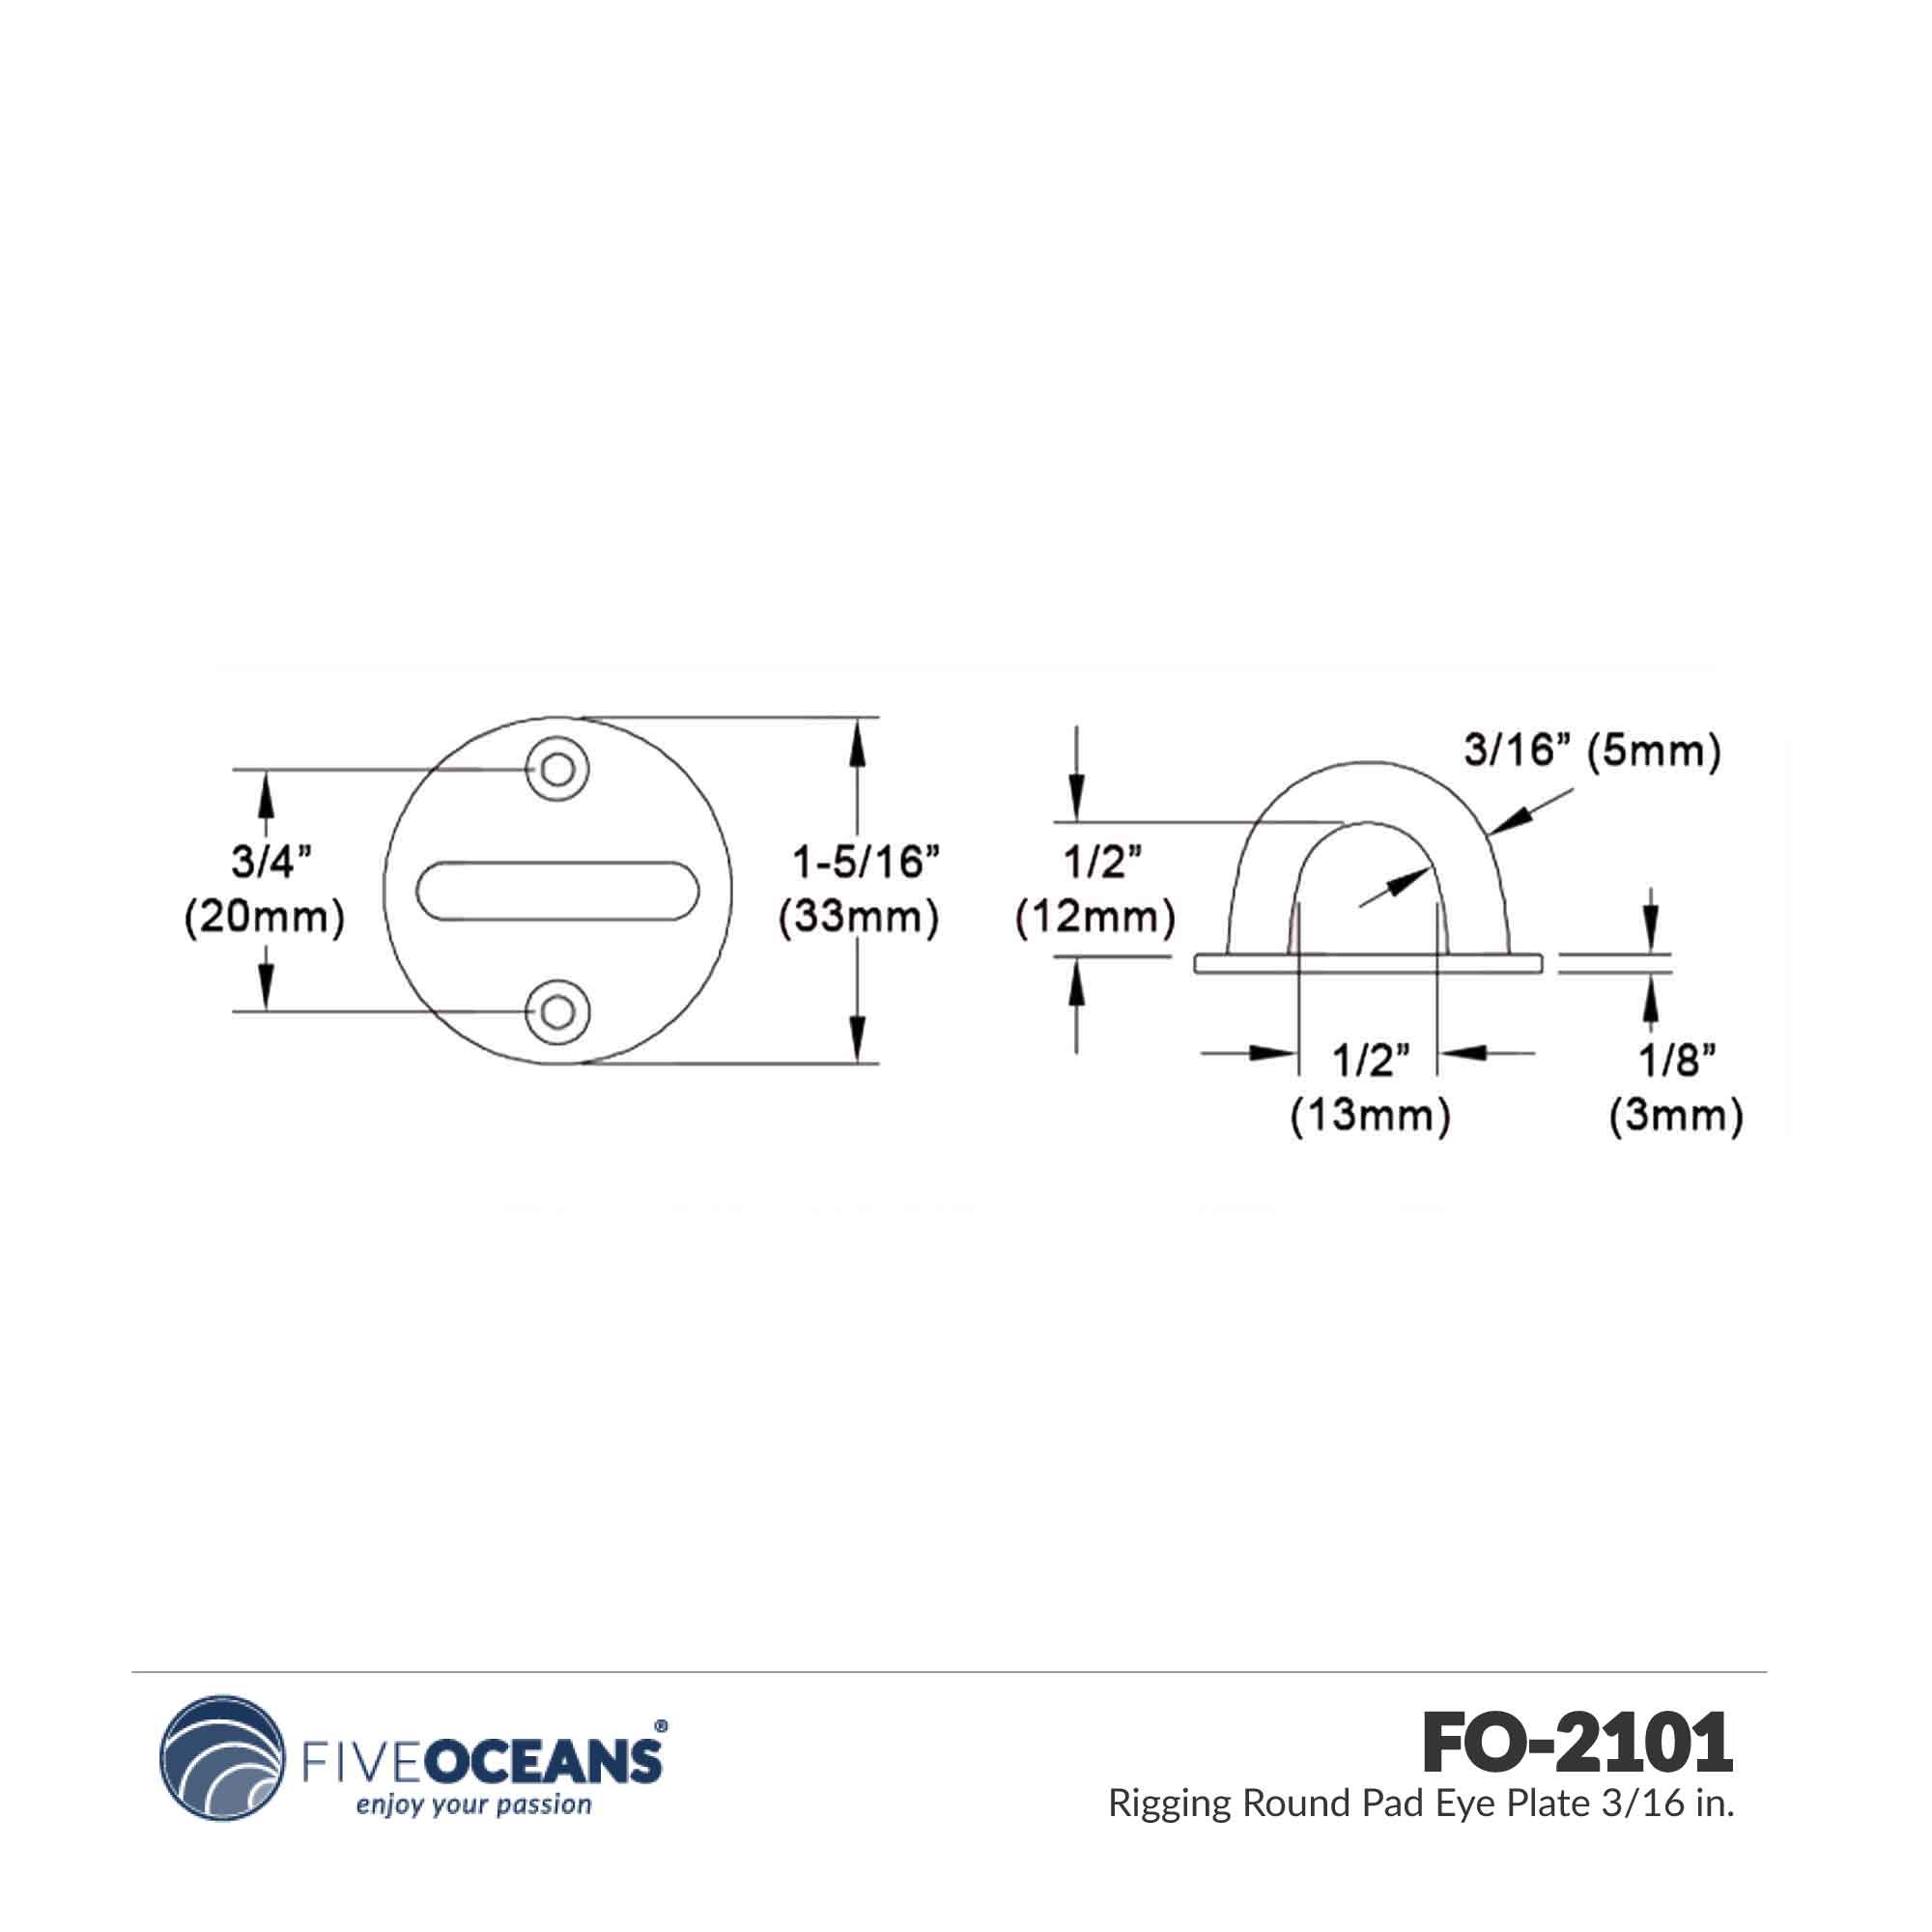 Rigging Round Pad Eye Plate 3/16" - FO2101